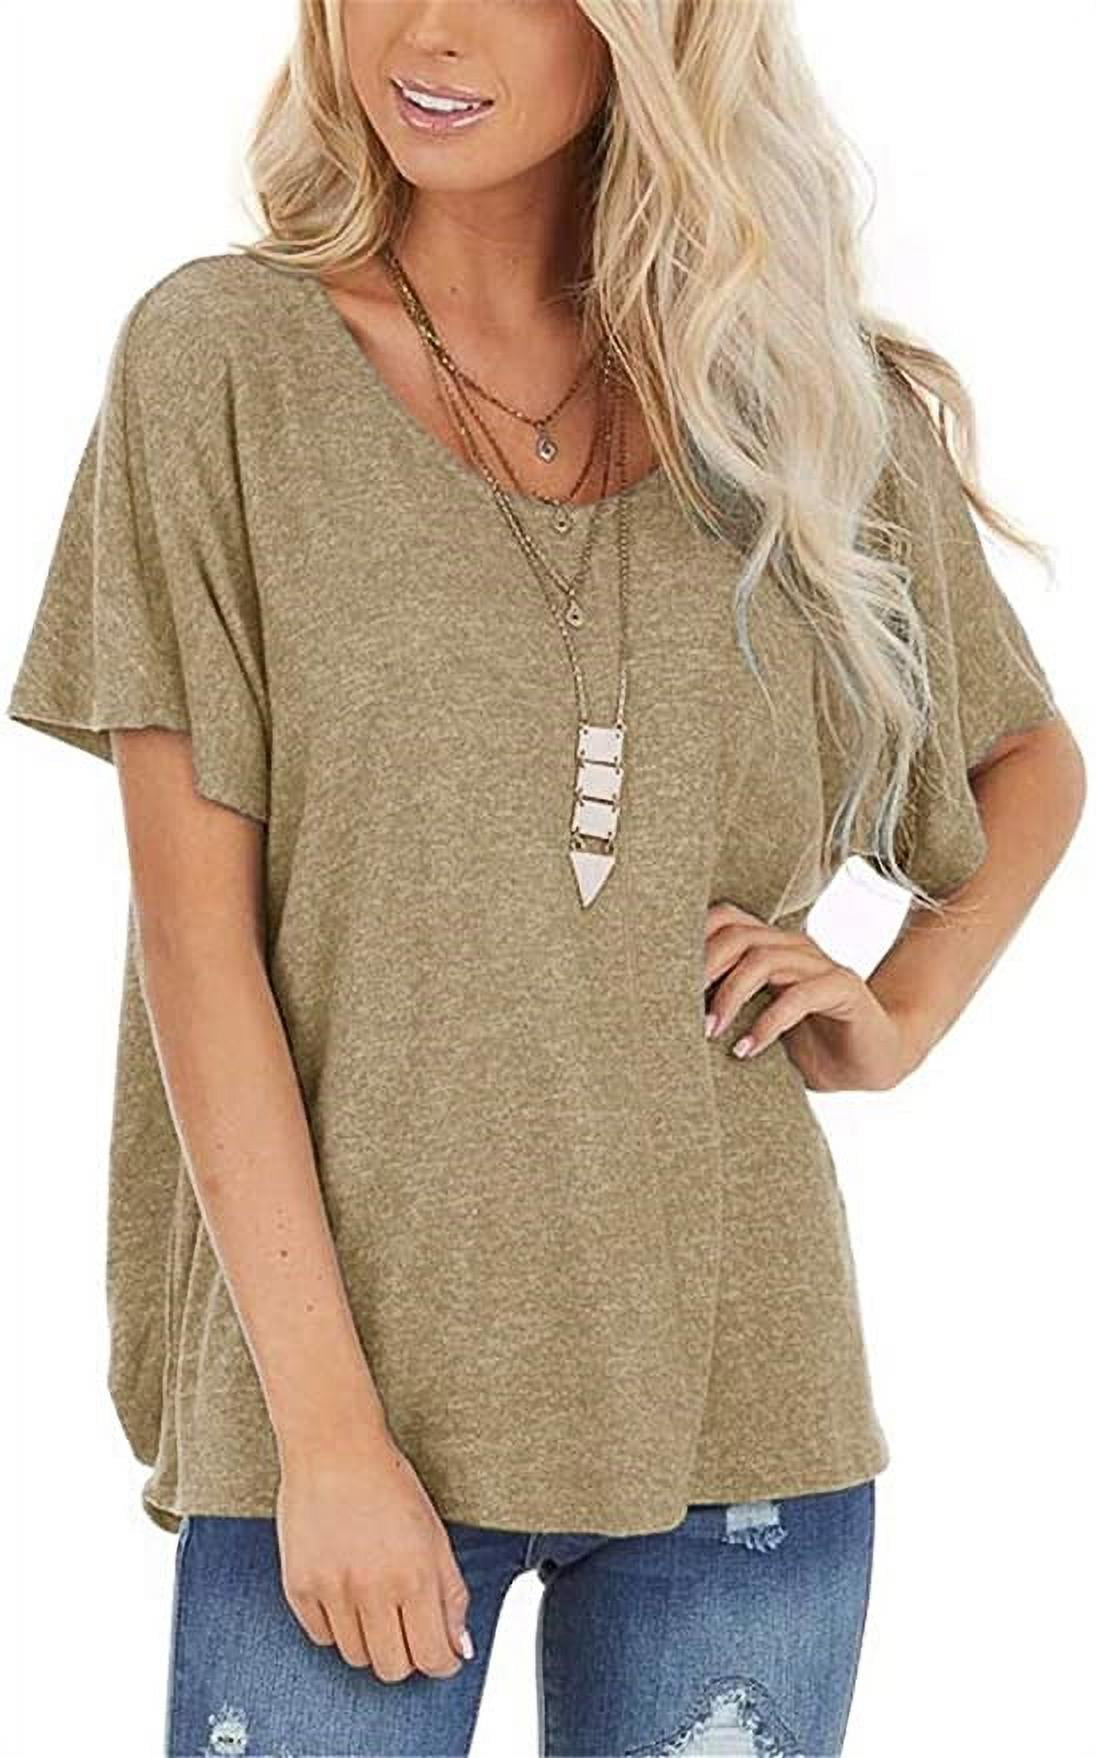 Women's Round Neck Backless Twisted Loose Short-Sleeved T-shirt Top